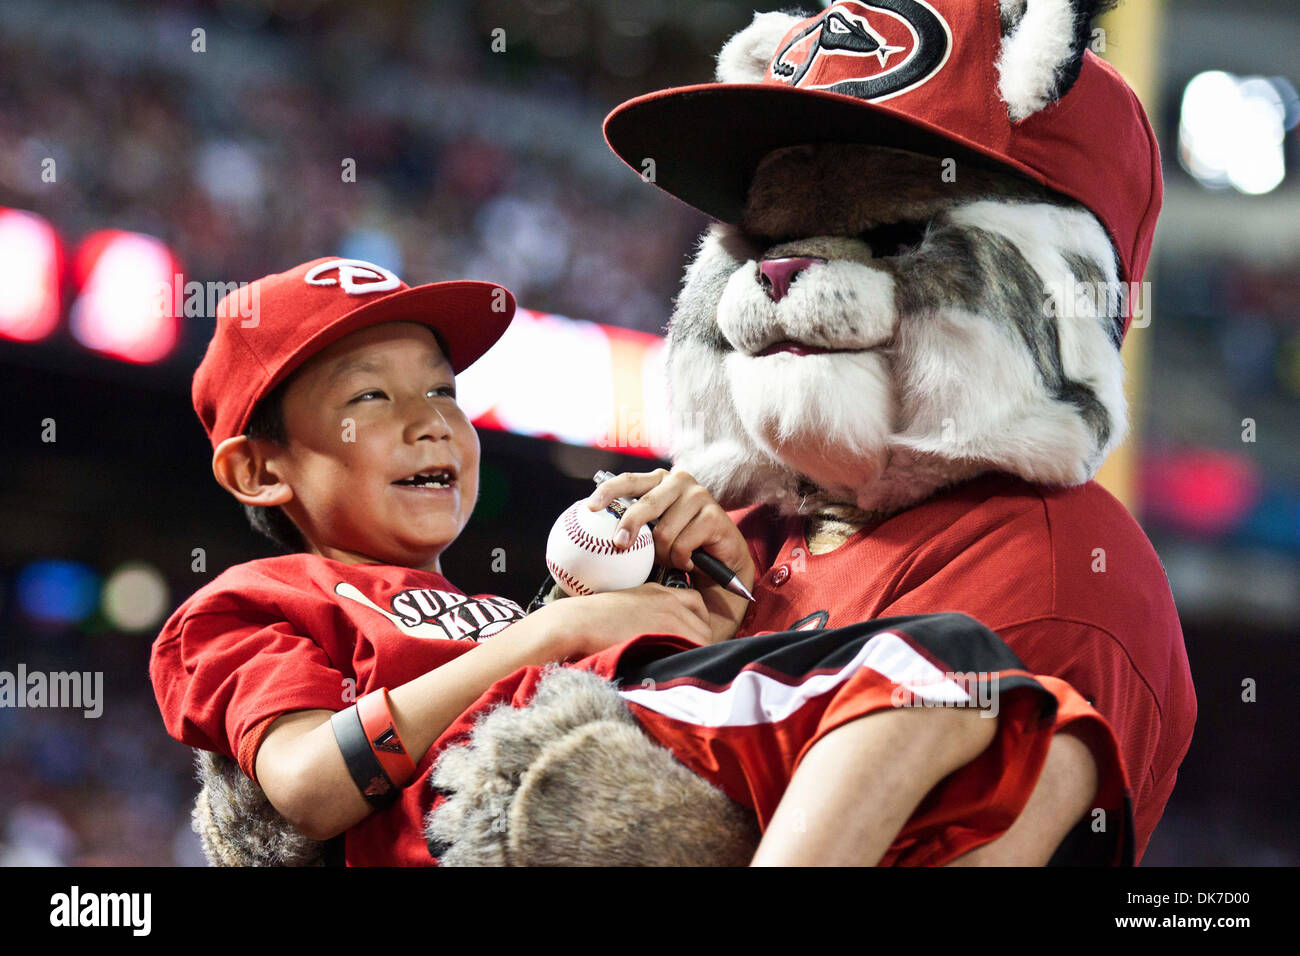 June 19, 2011 - Phoenix, Arizona, U.S - Arizona Diamondbacks' mascot  carries a young fan prior to the start of a game against the Chicago White  Sox. The White Sox defeated the